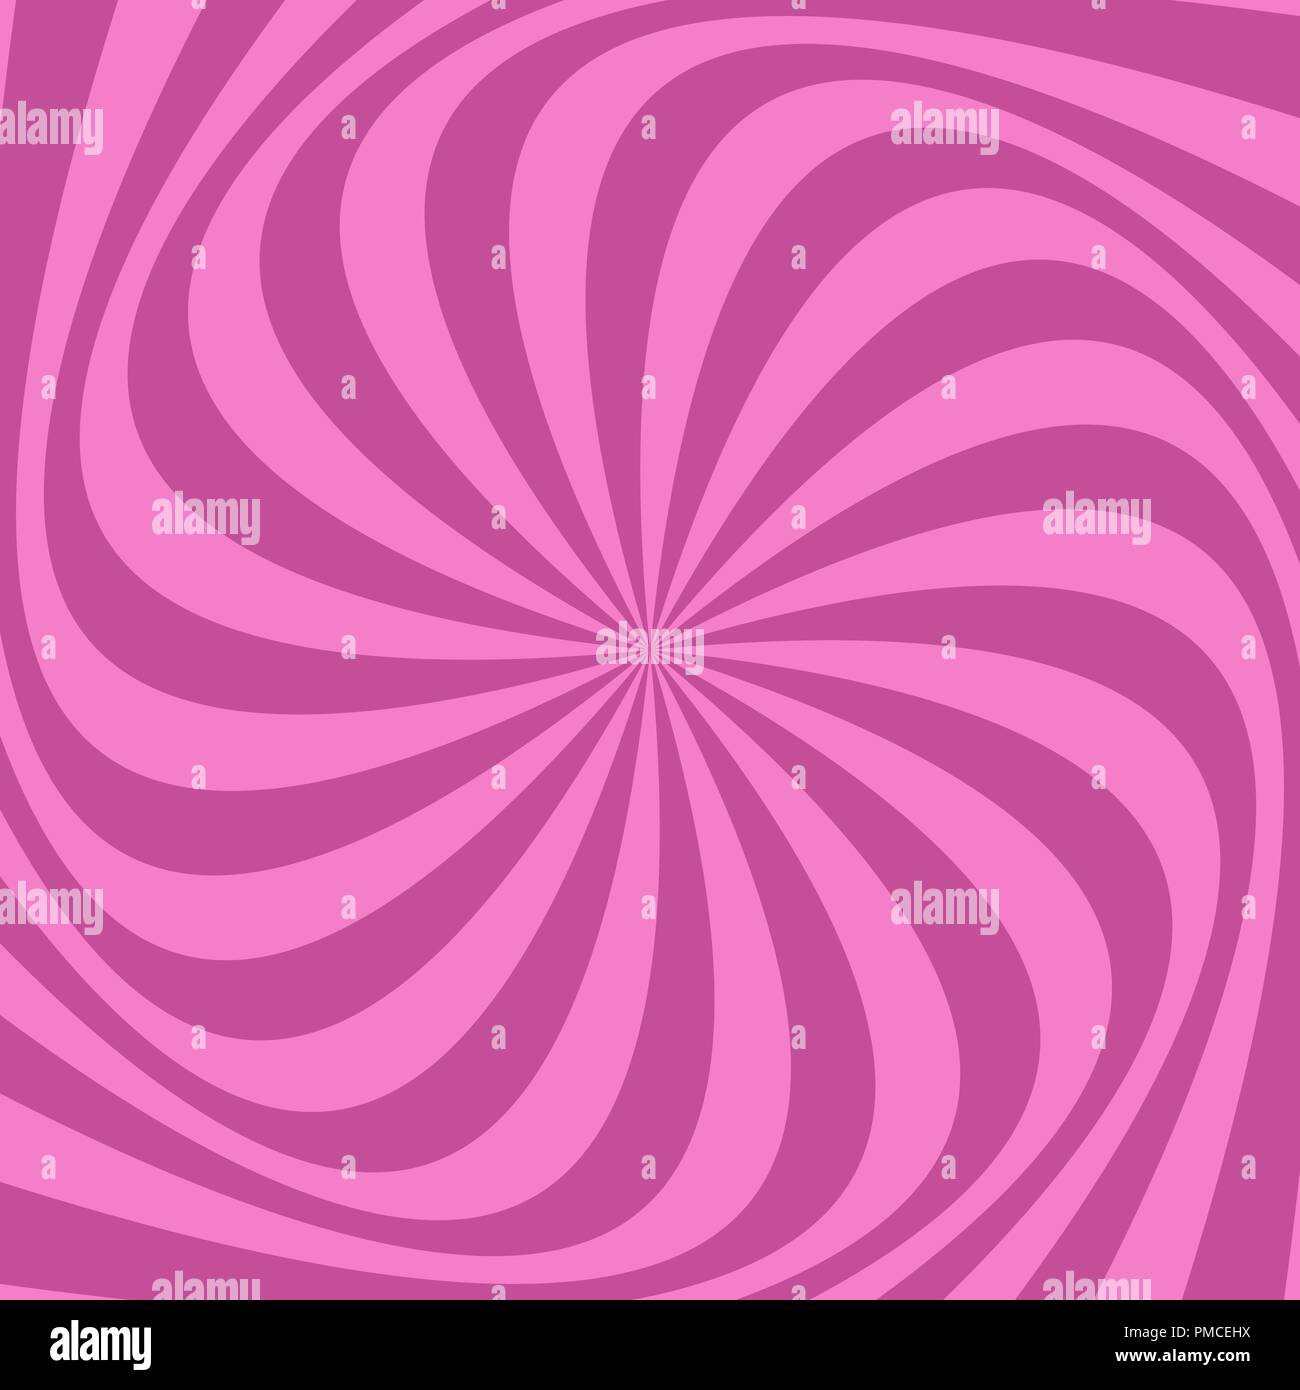 Pink hypnotic abstract spiral ray background design Stock Vector